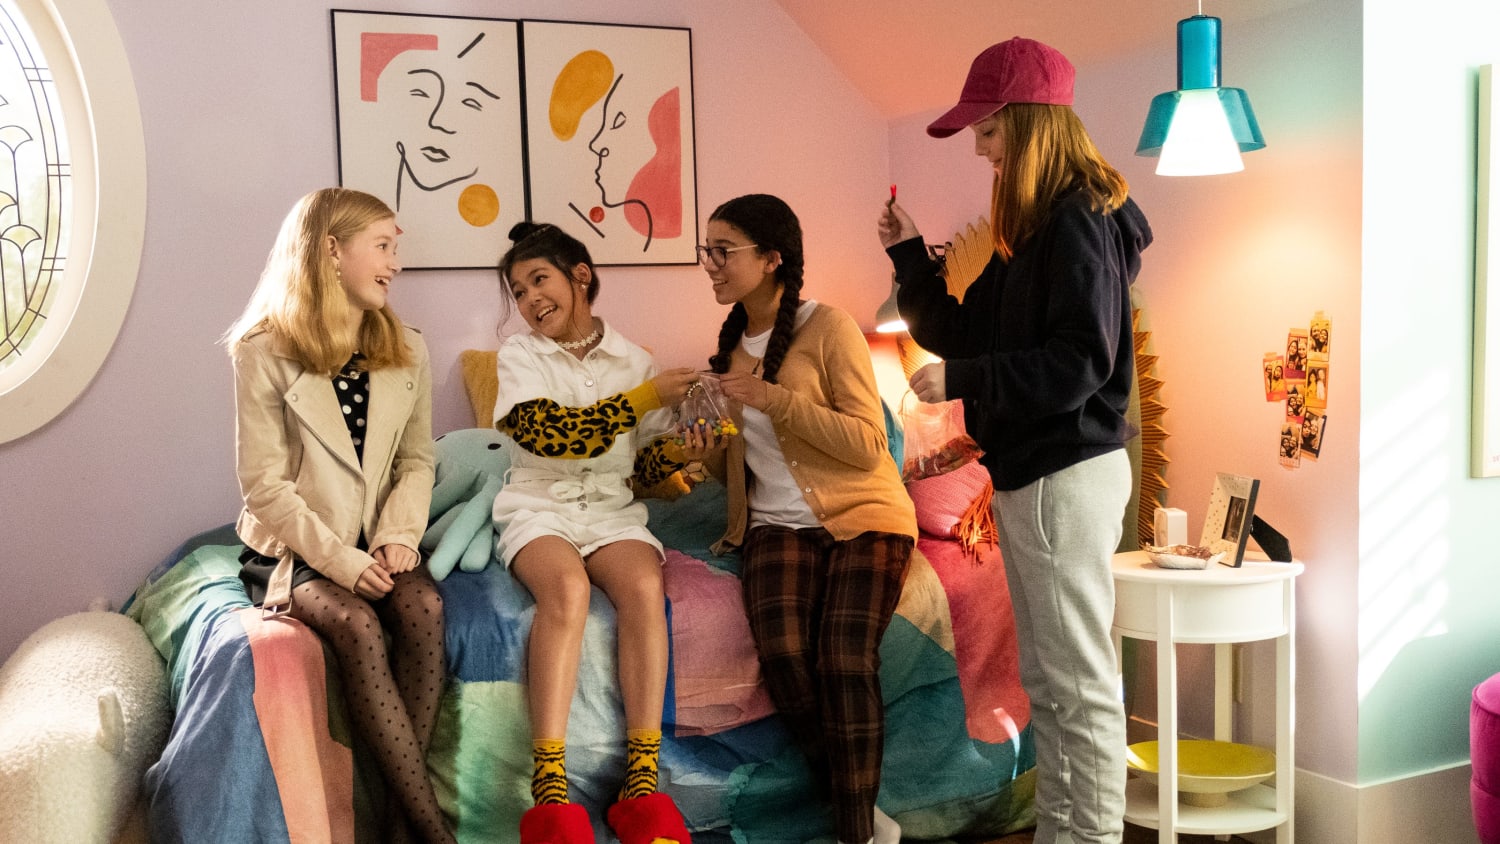 'The Baby-Sitters Club' on Netflix will lift you out of quarantine doldrums